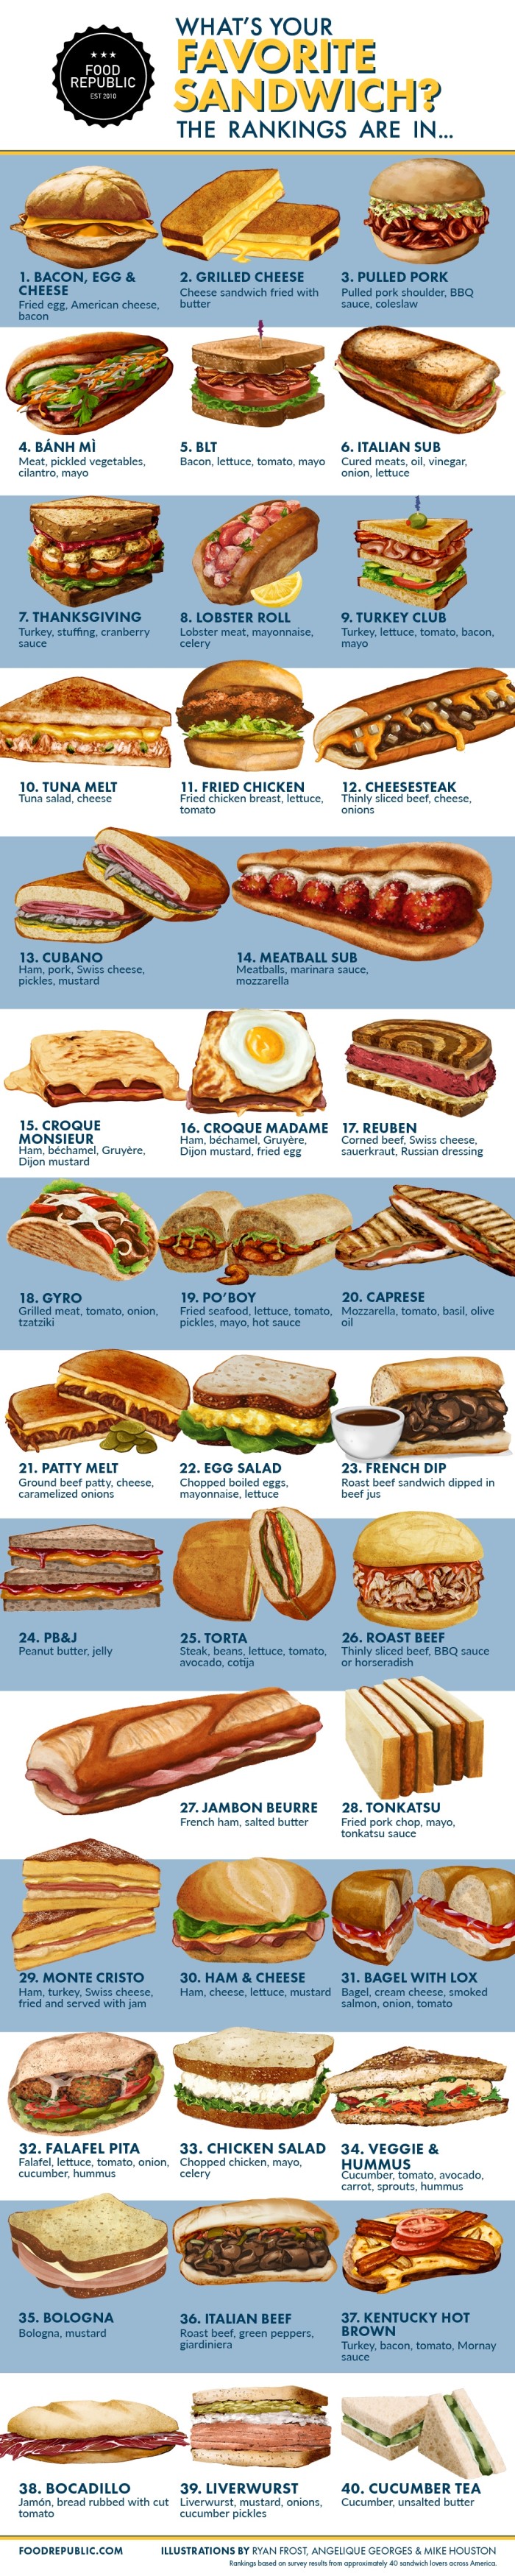 what's your favorite sandwich?